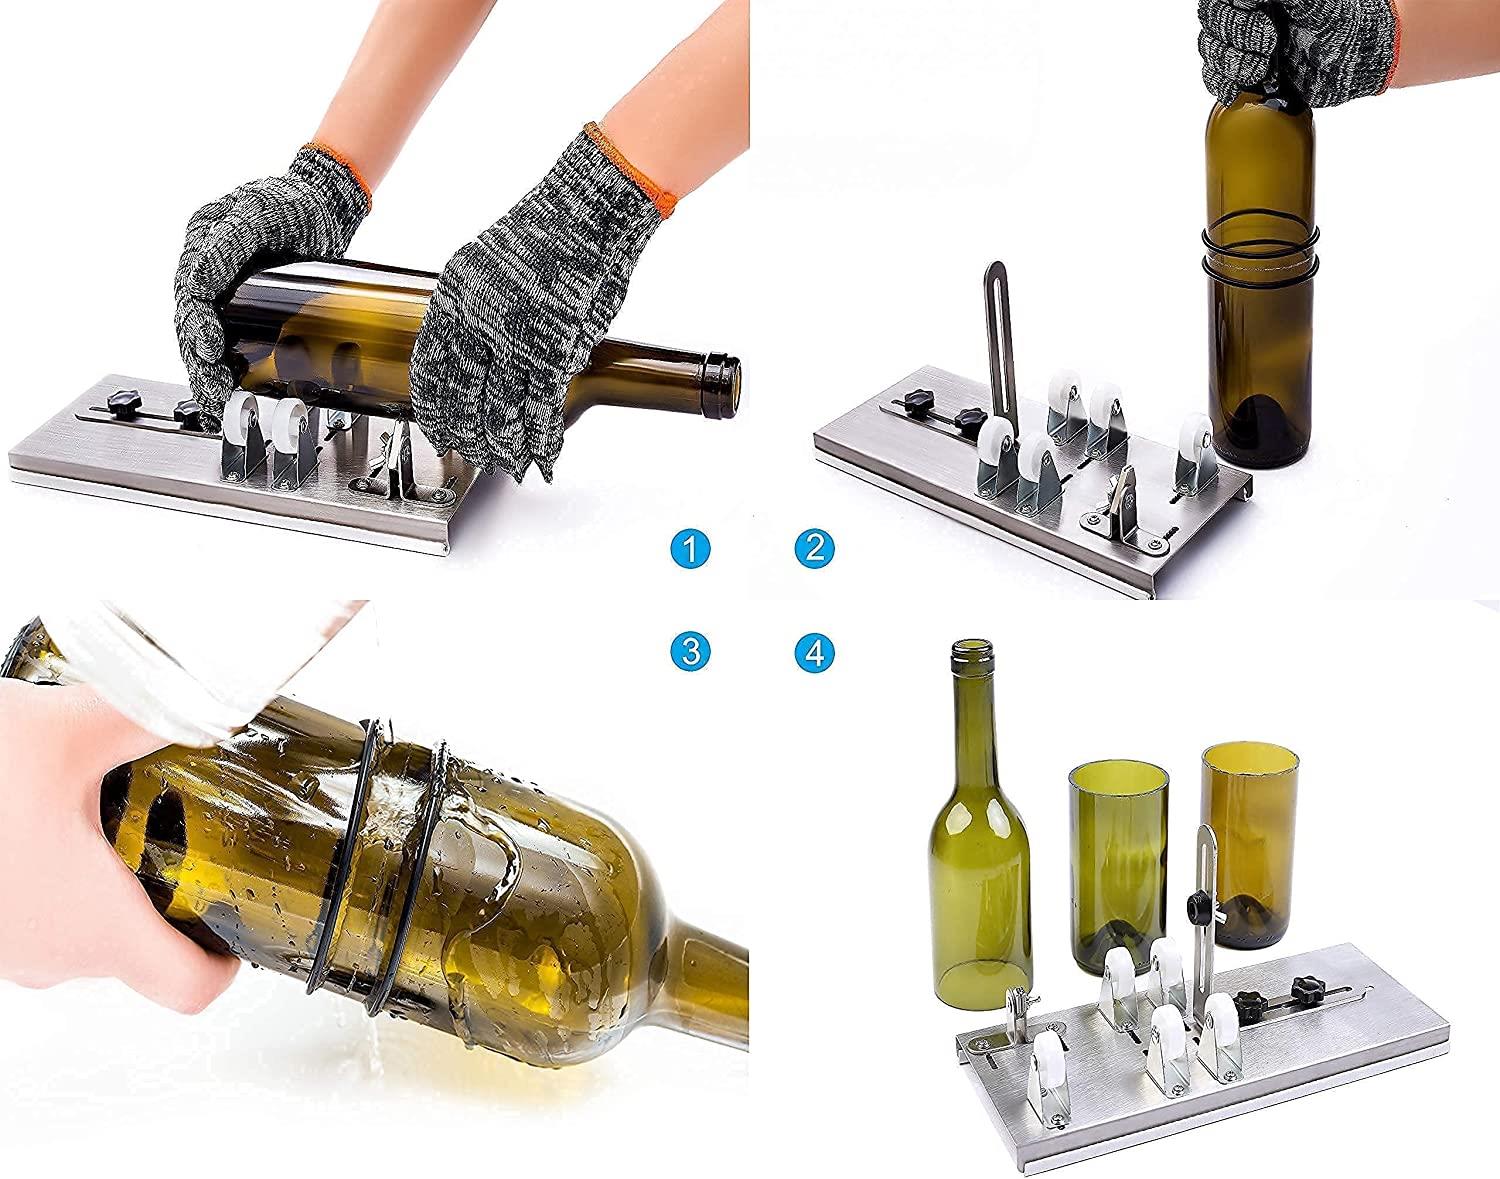 Glass Bottle Cutter & Accessories Kit, Upgraded Glass Cutter for